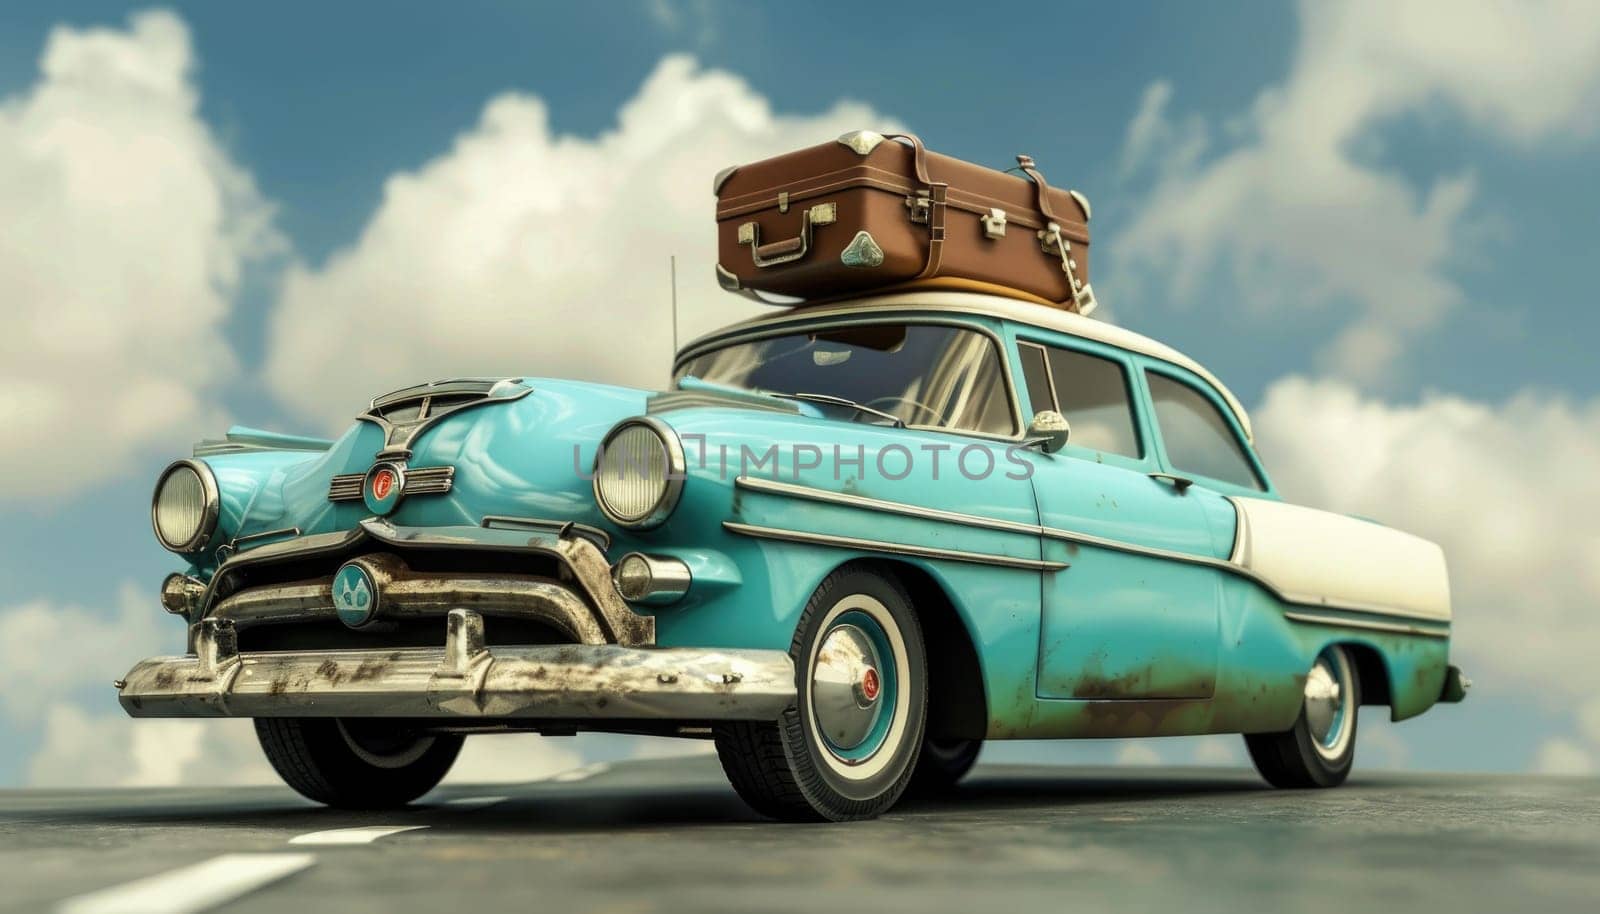 A blue car with luggage on top of it is parked on a beach by AI generated image.